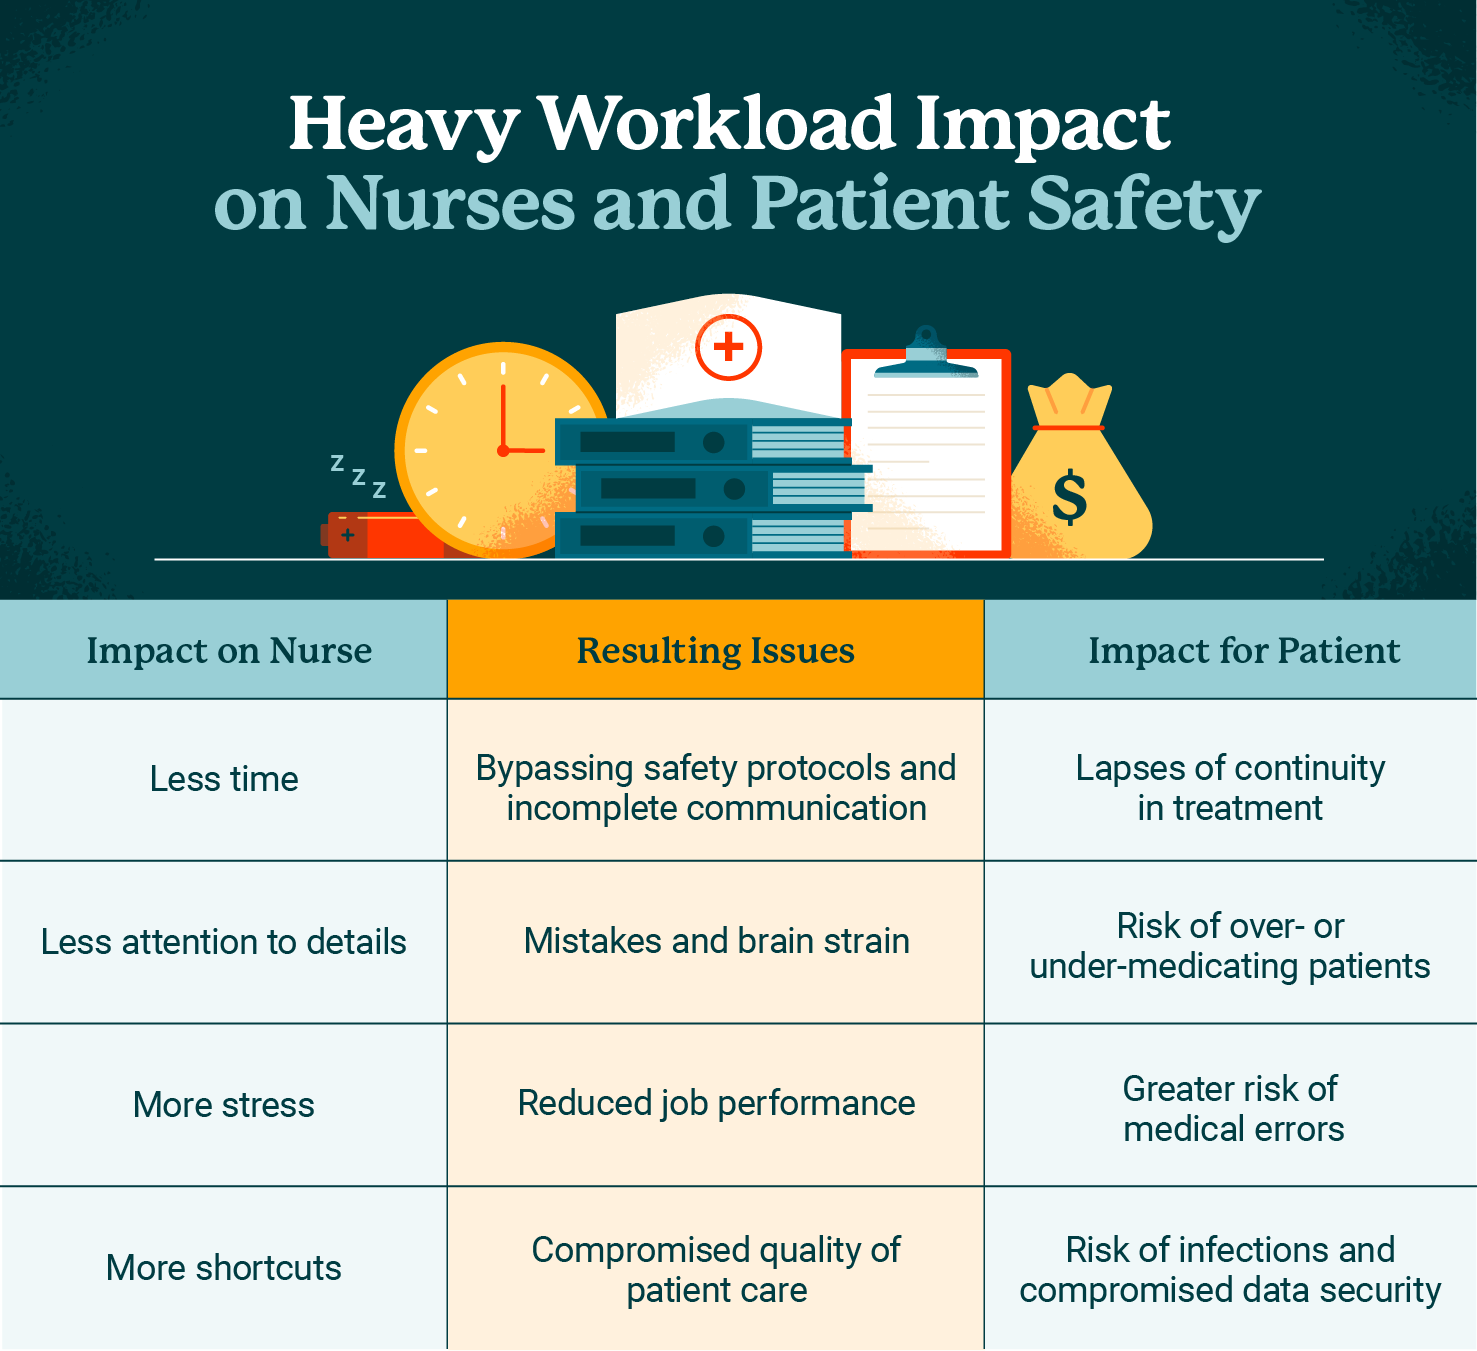 Heavy workload impact on nurses and patient safety graphic